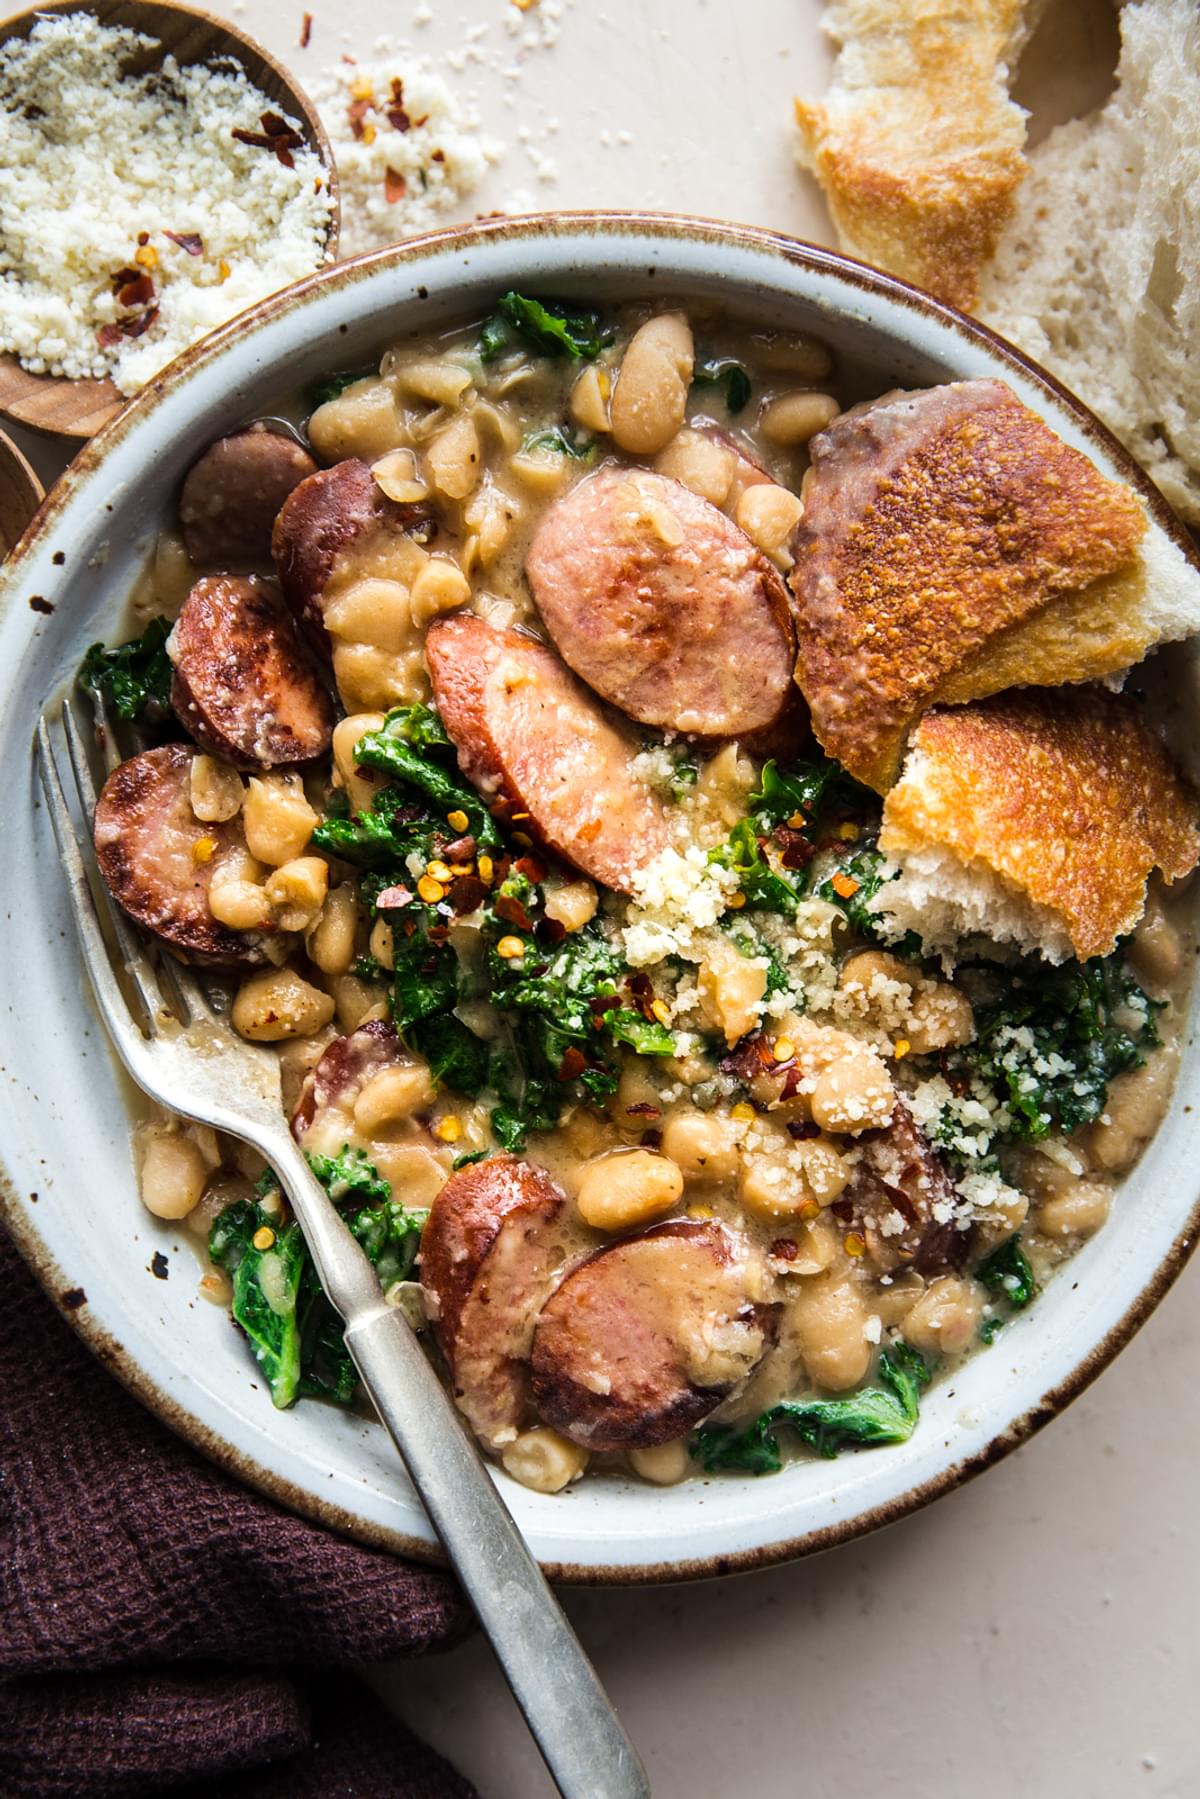 white bean and sausage skillet dinner with kale in a bowl served with crusty bread